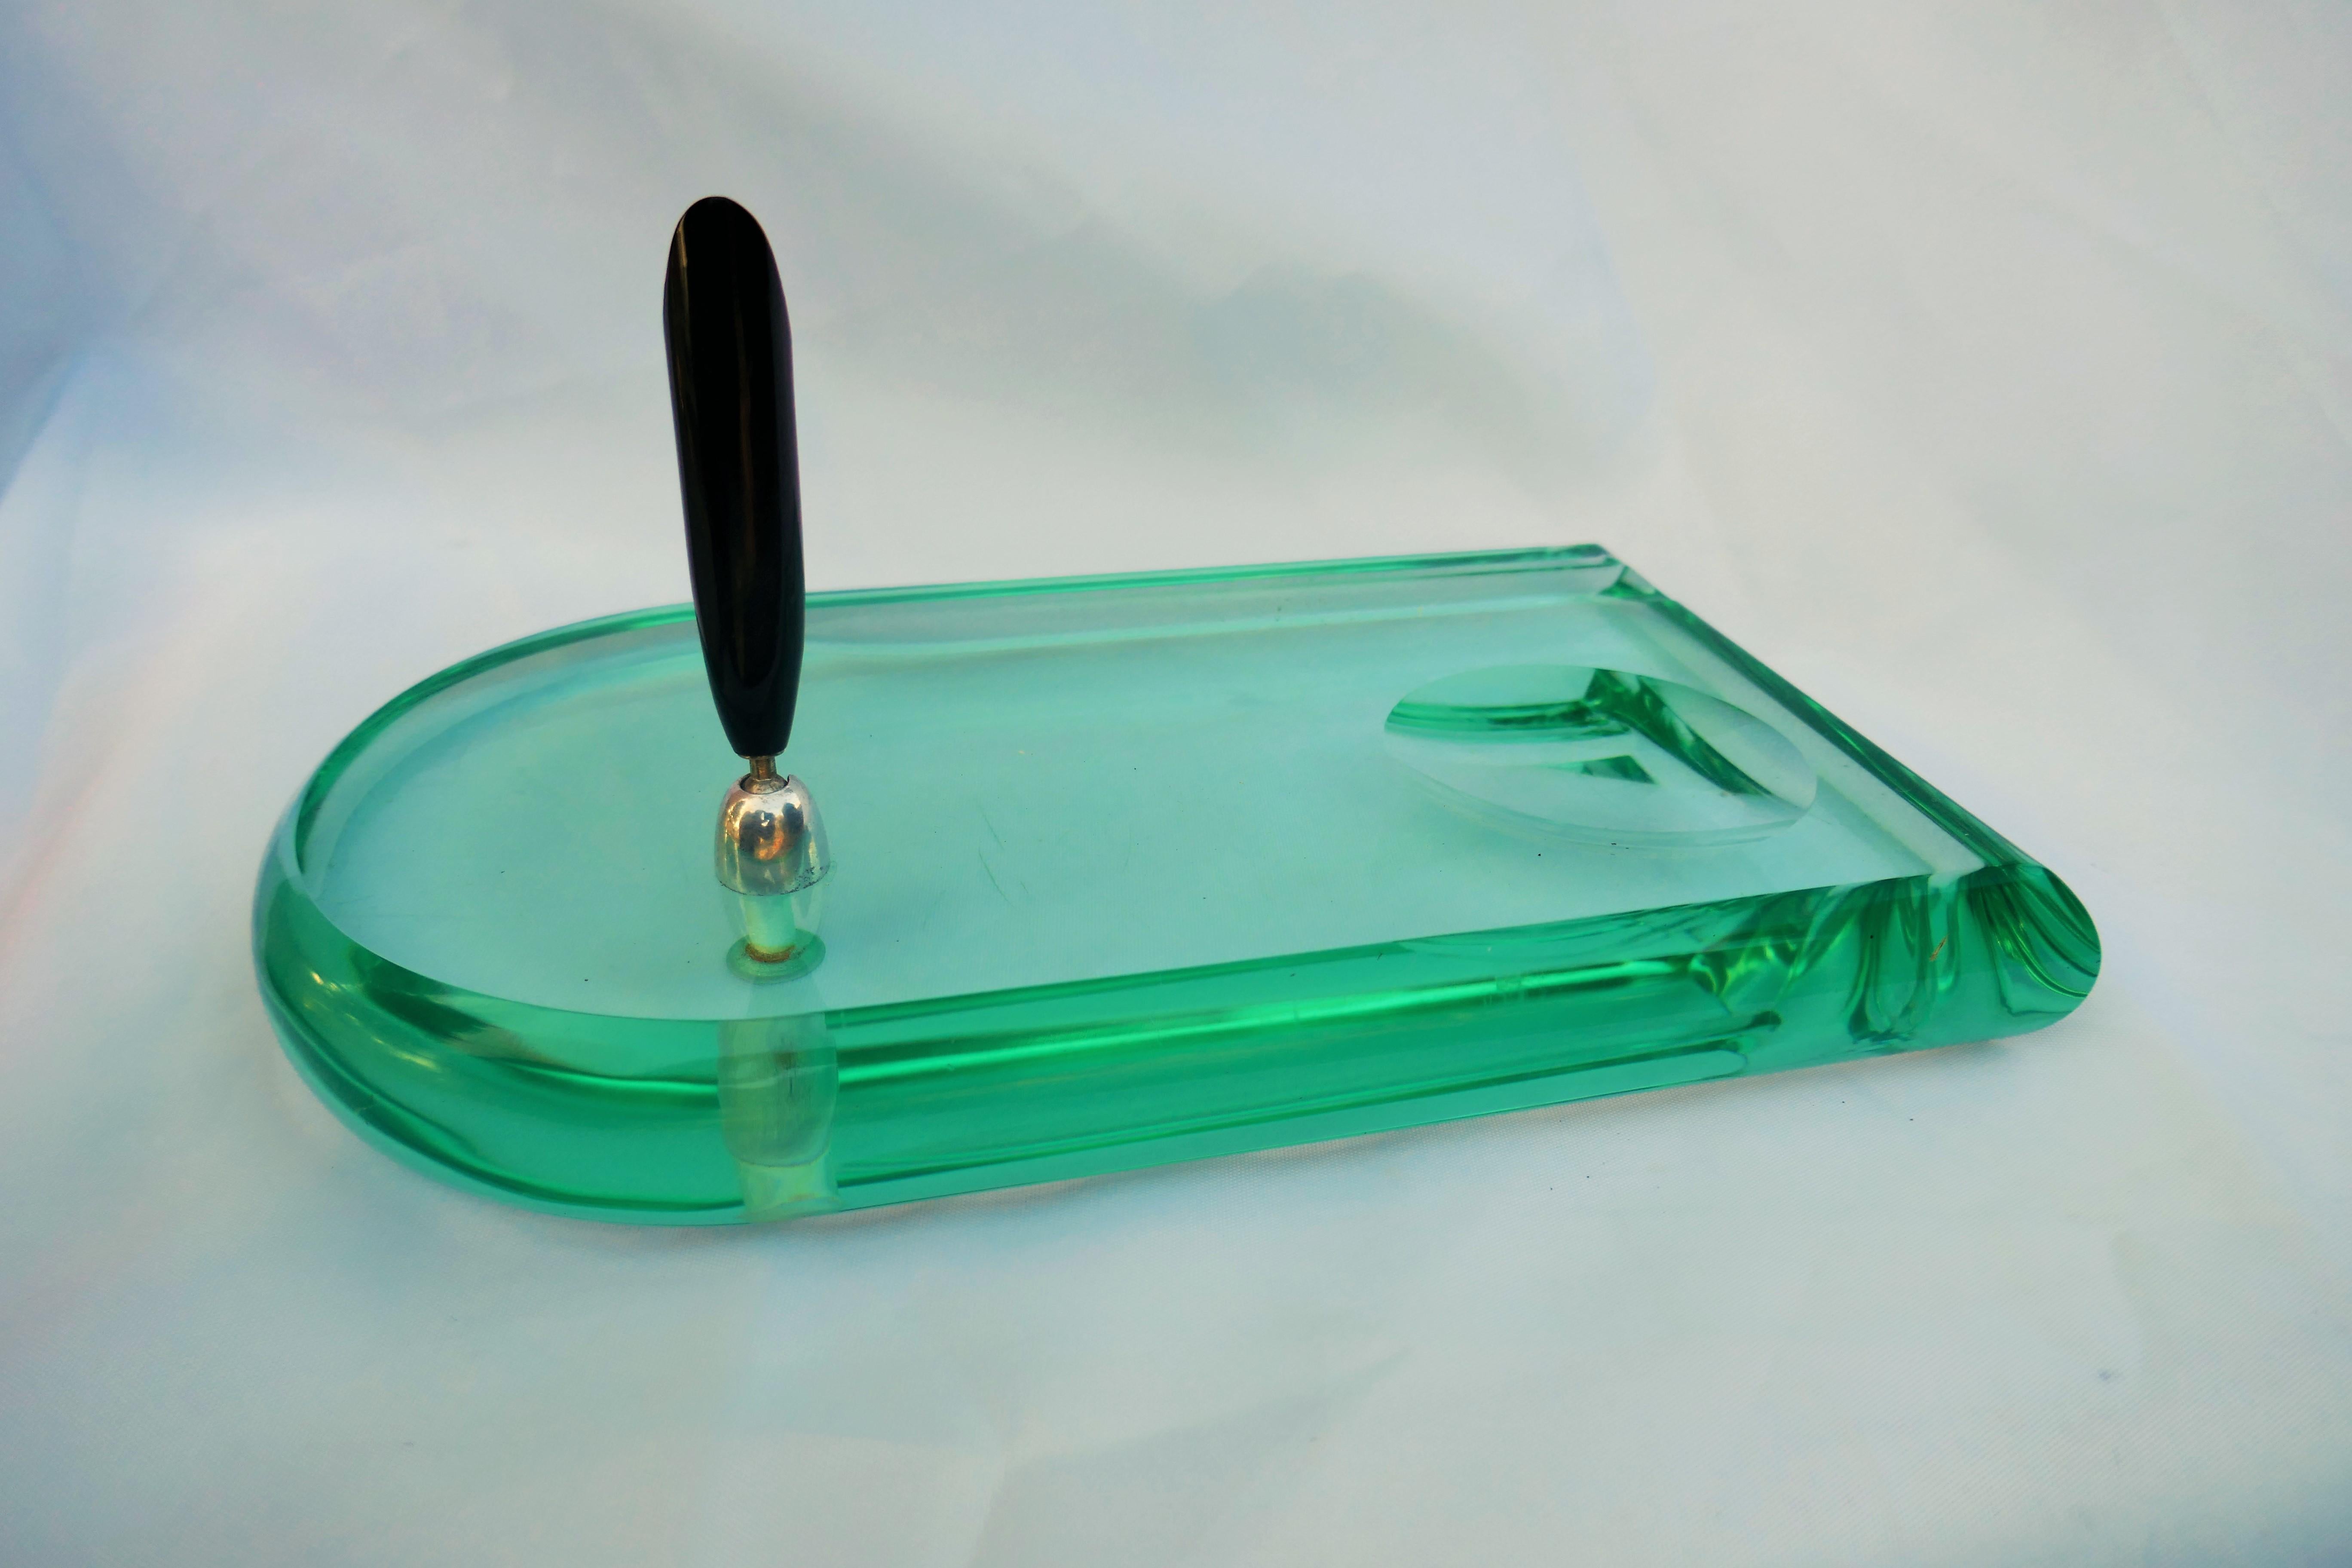 Glass inkwell attributed to a design by Max Ingrand for Fontana Arte
Thank you